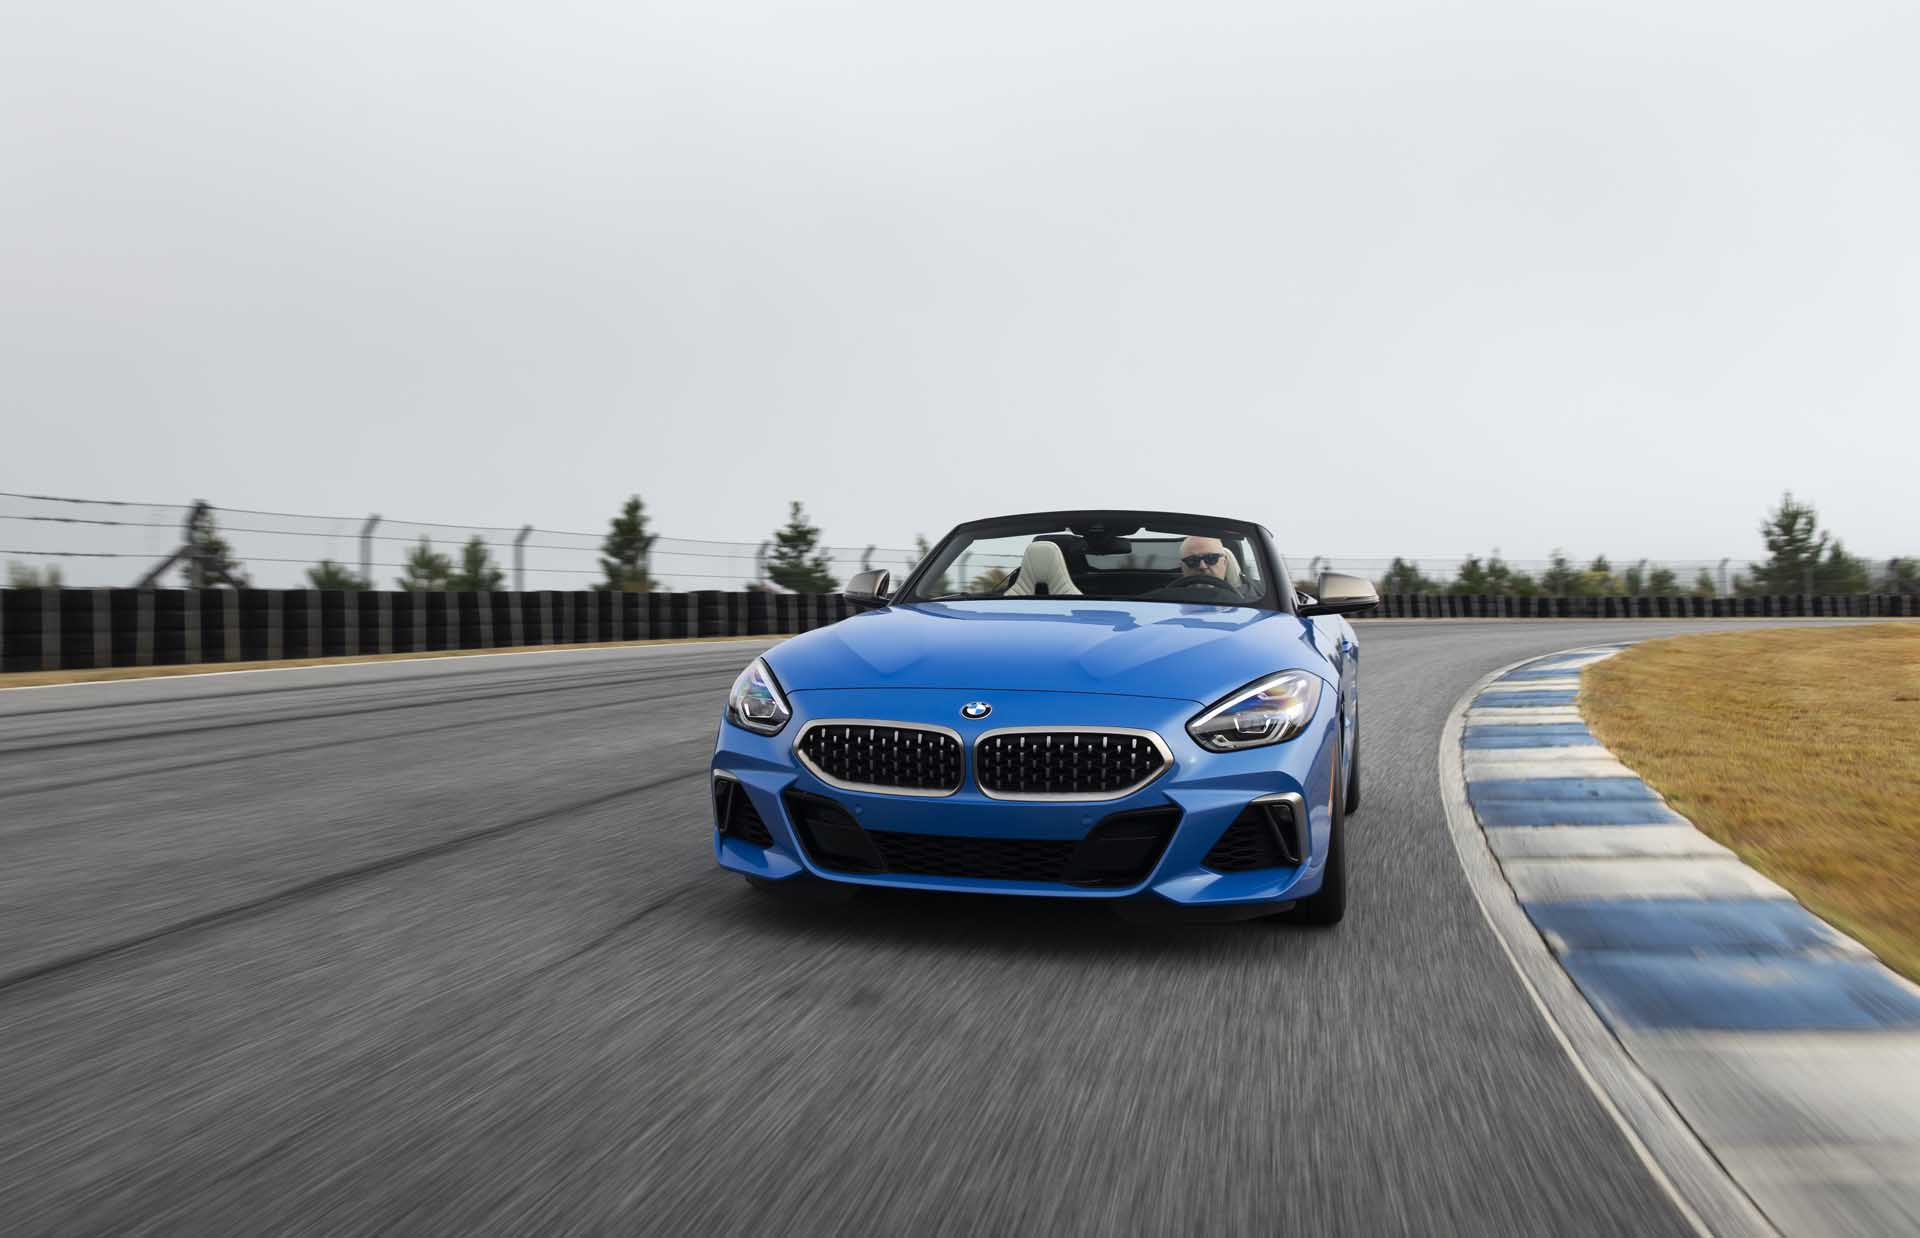 2020 BMW Z4 M40i Roadster Wallpapers 41 HD Images   NewCarCars